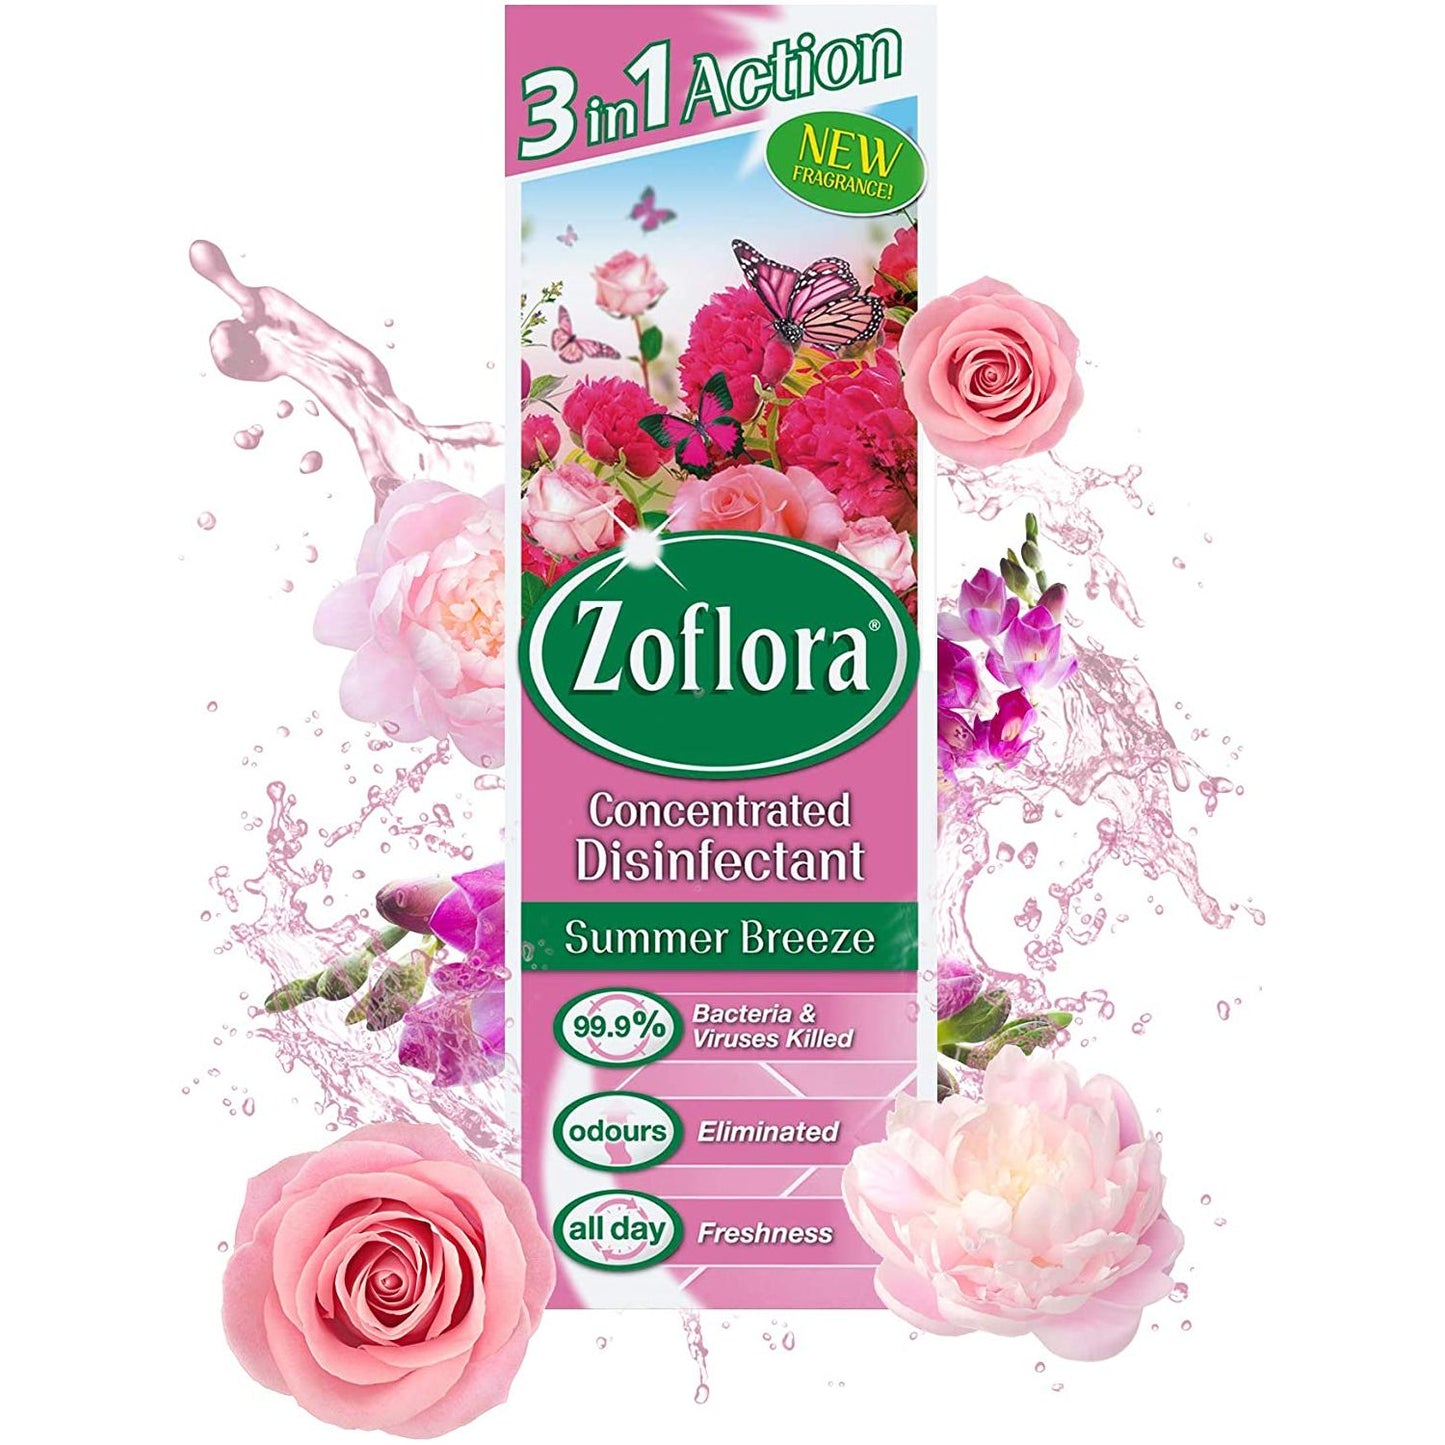 Zoflora Concentrated Multipurpose Disinfectant, Summer Breeze Scent, 250ml